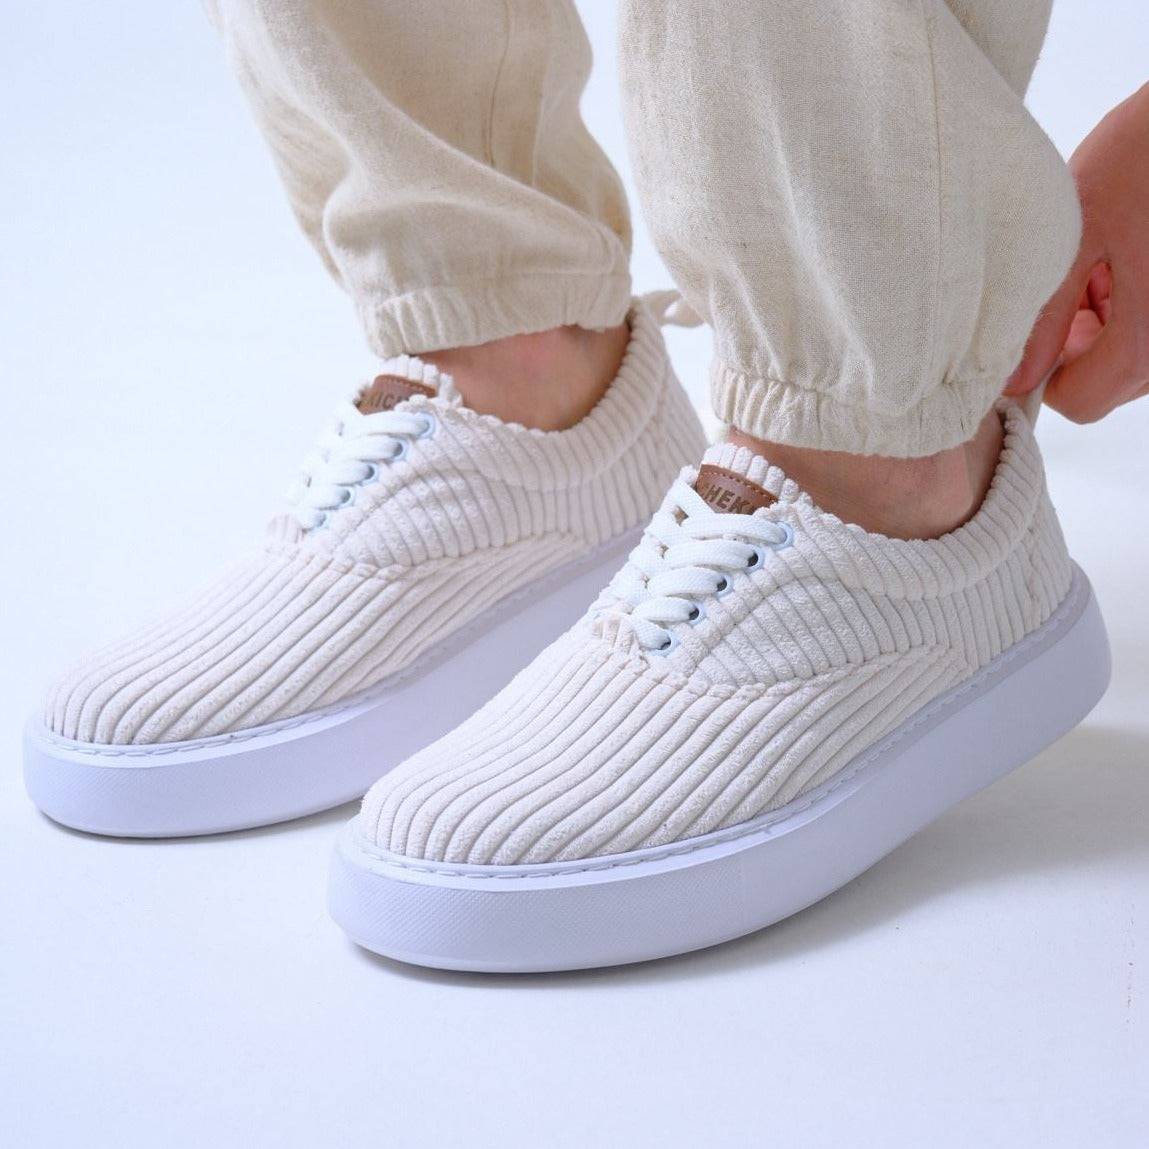 Men's Light Weight Summer Sneakers | Mario in Off White